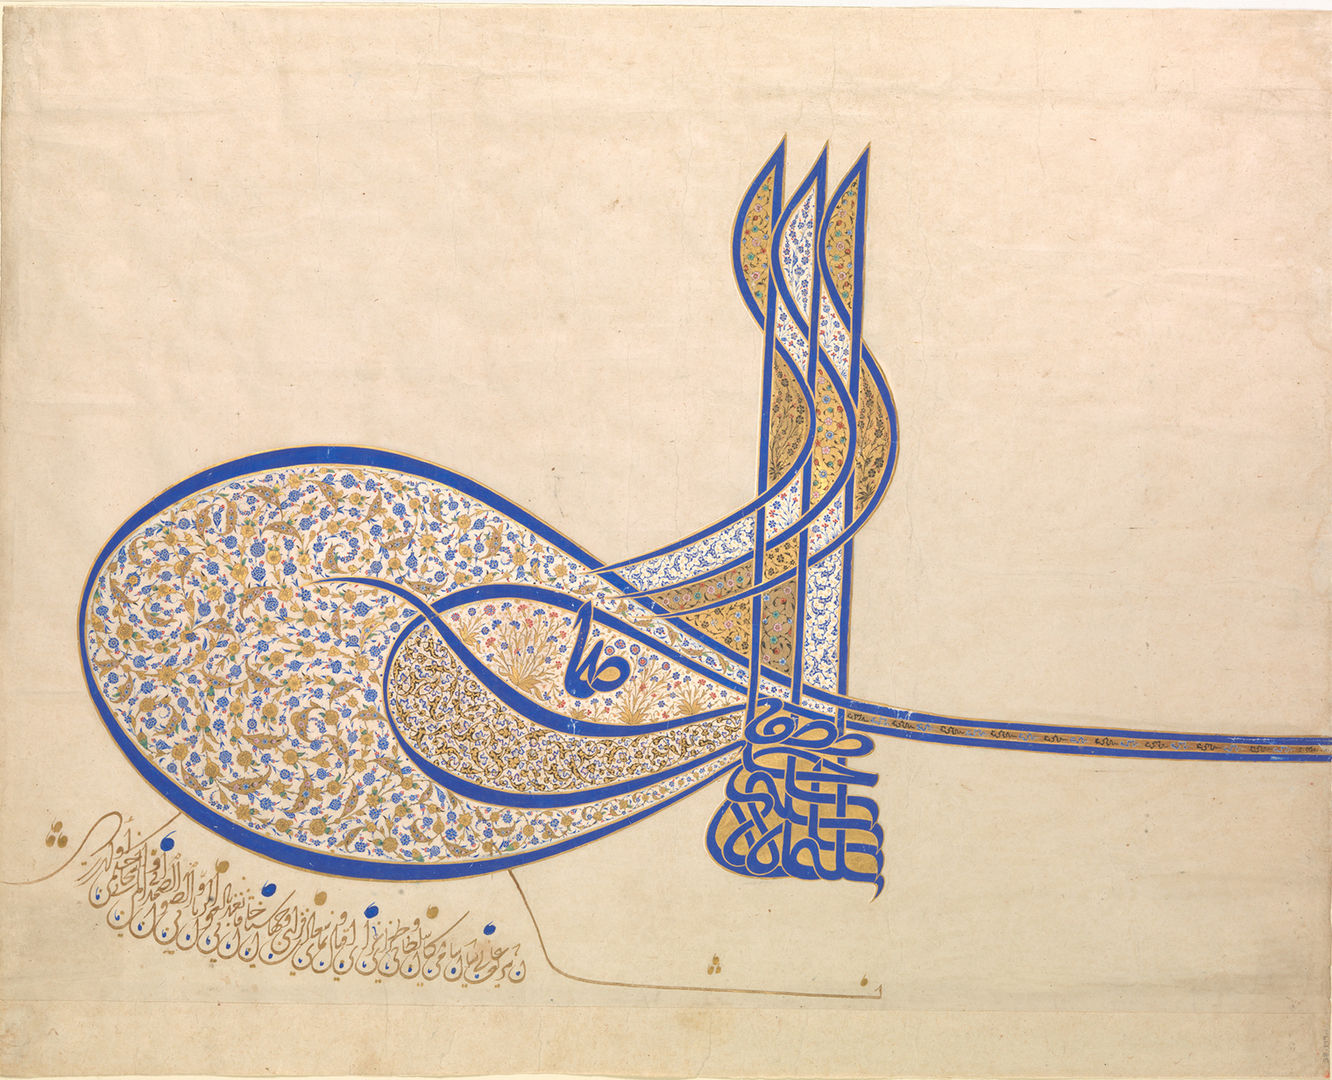 A highly ornate calligraphic Arabic signature in blue and decorated profusely with tiny painted and gilded flowers in blue and white